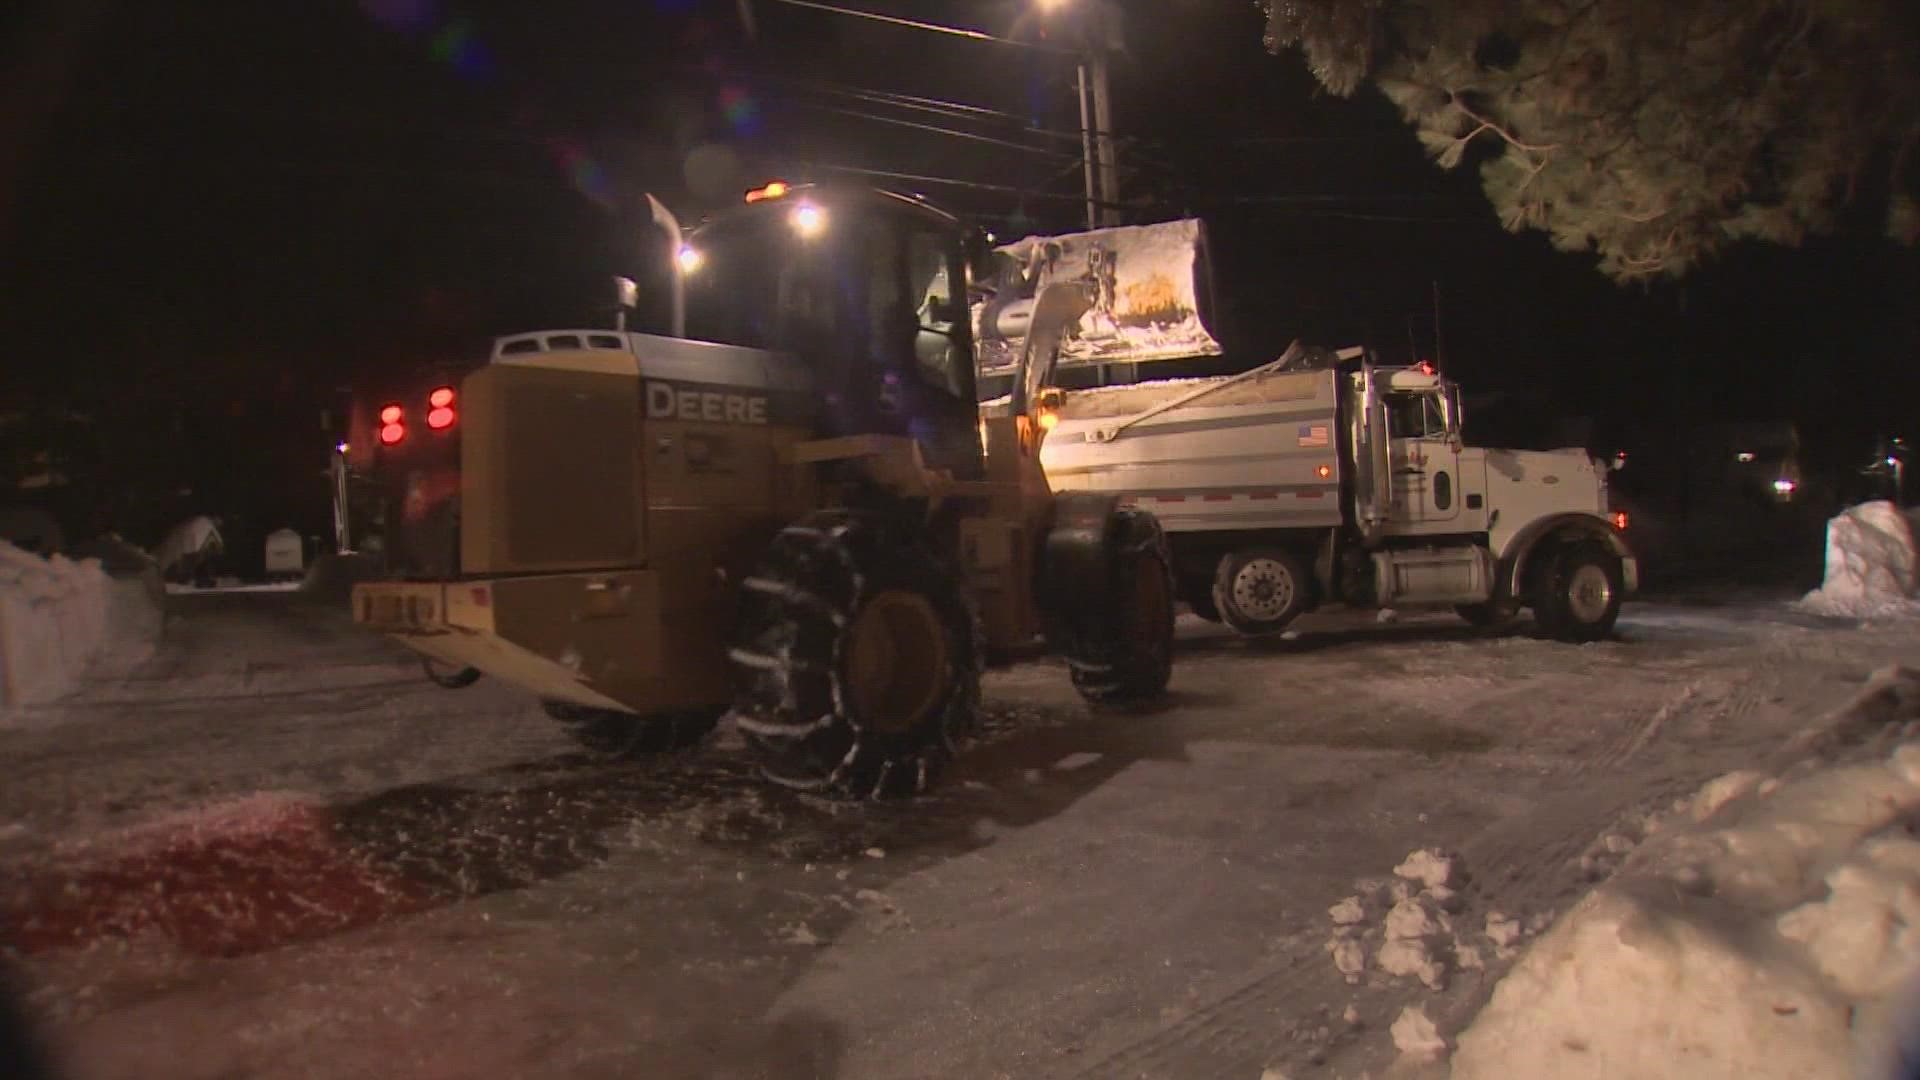 Crews have worked around the clock to help Leavenworth dig out of 4 feet of snow that fell in 48 hours.